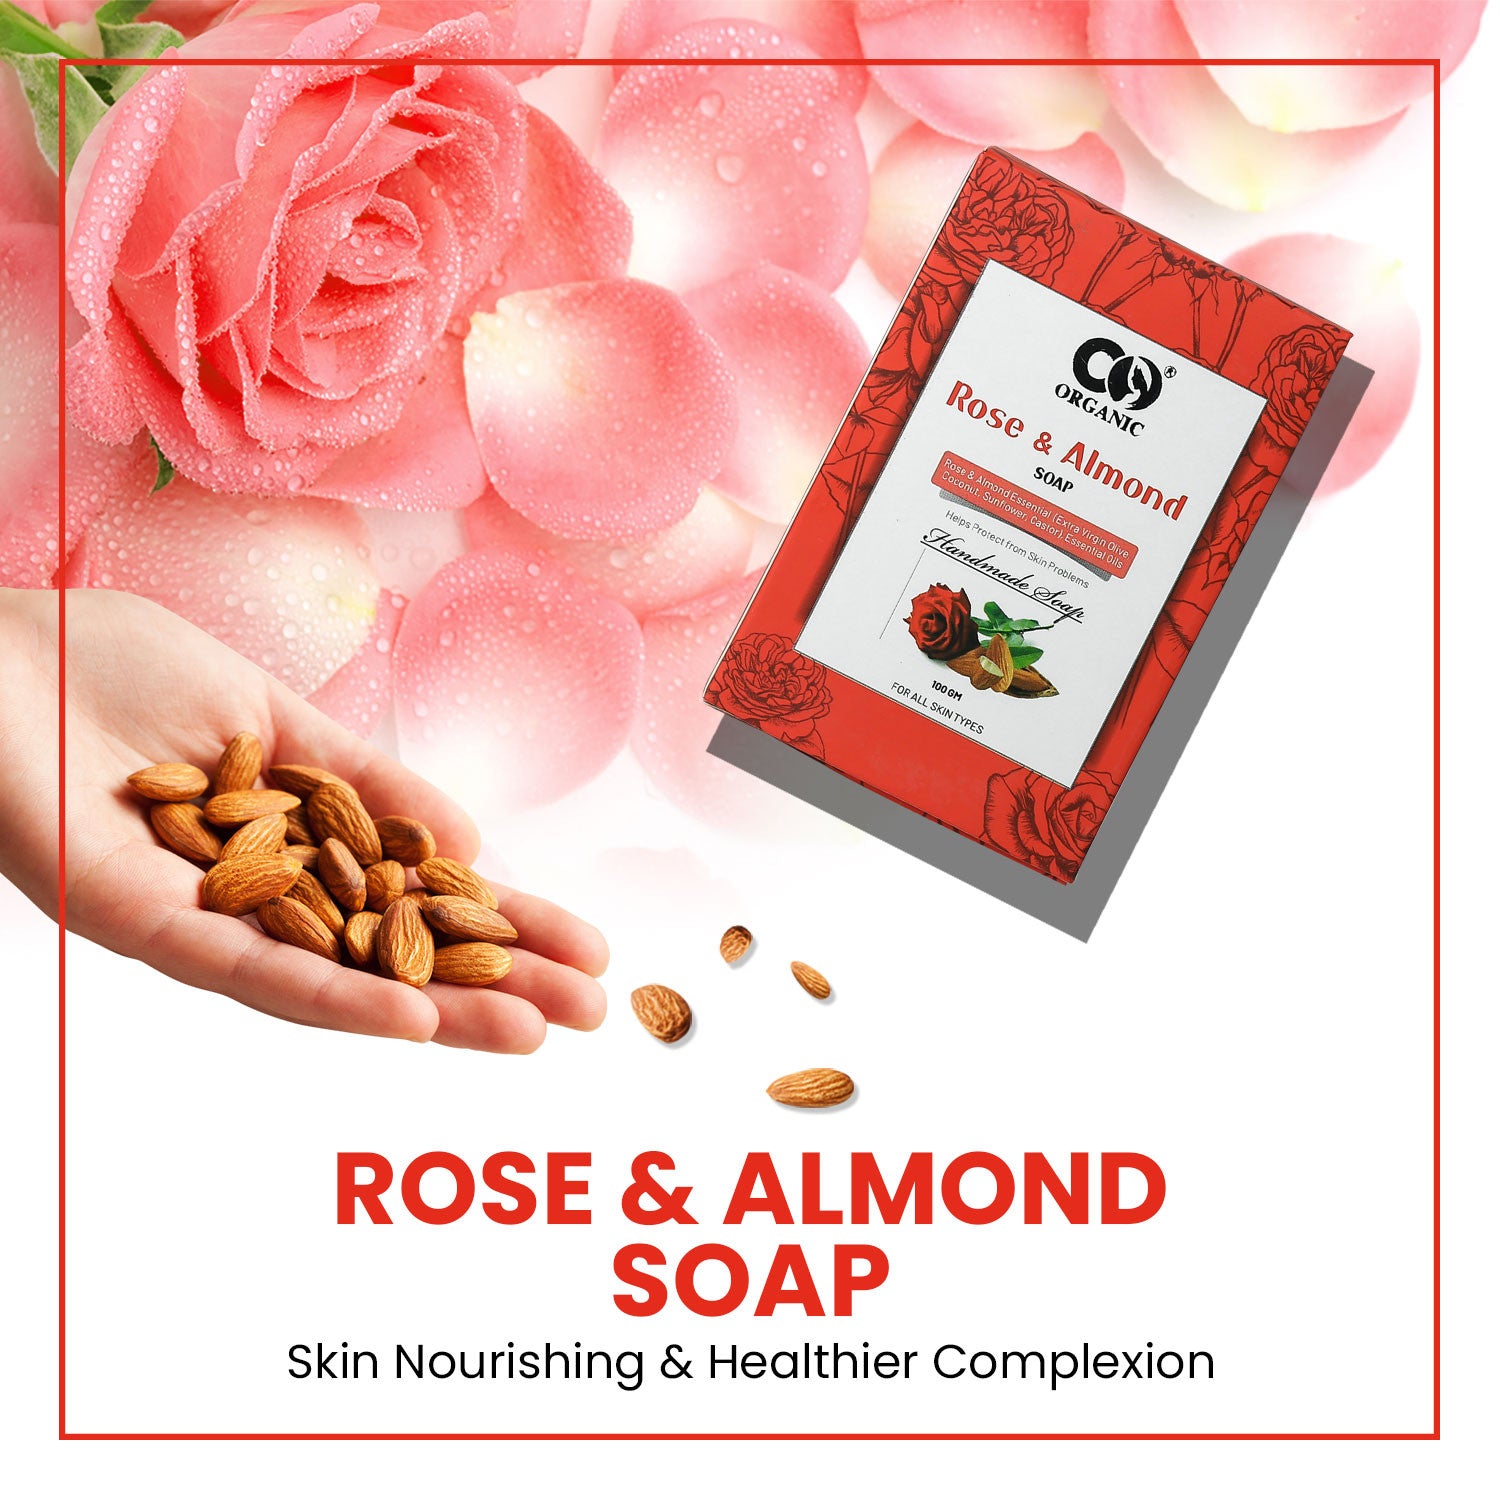 Co Organic Rose & Almond Soap - Pack of 2